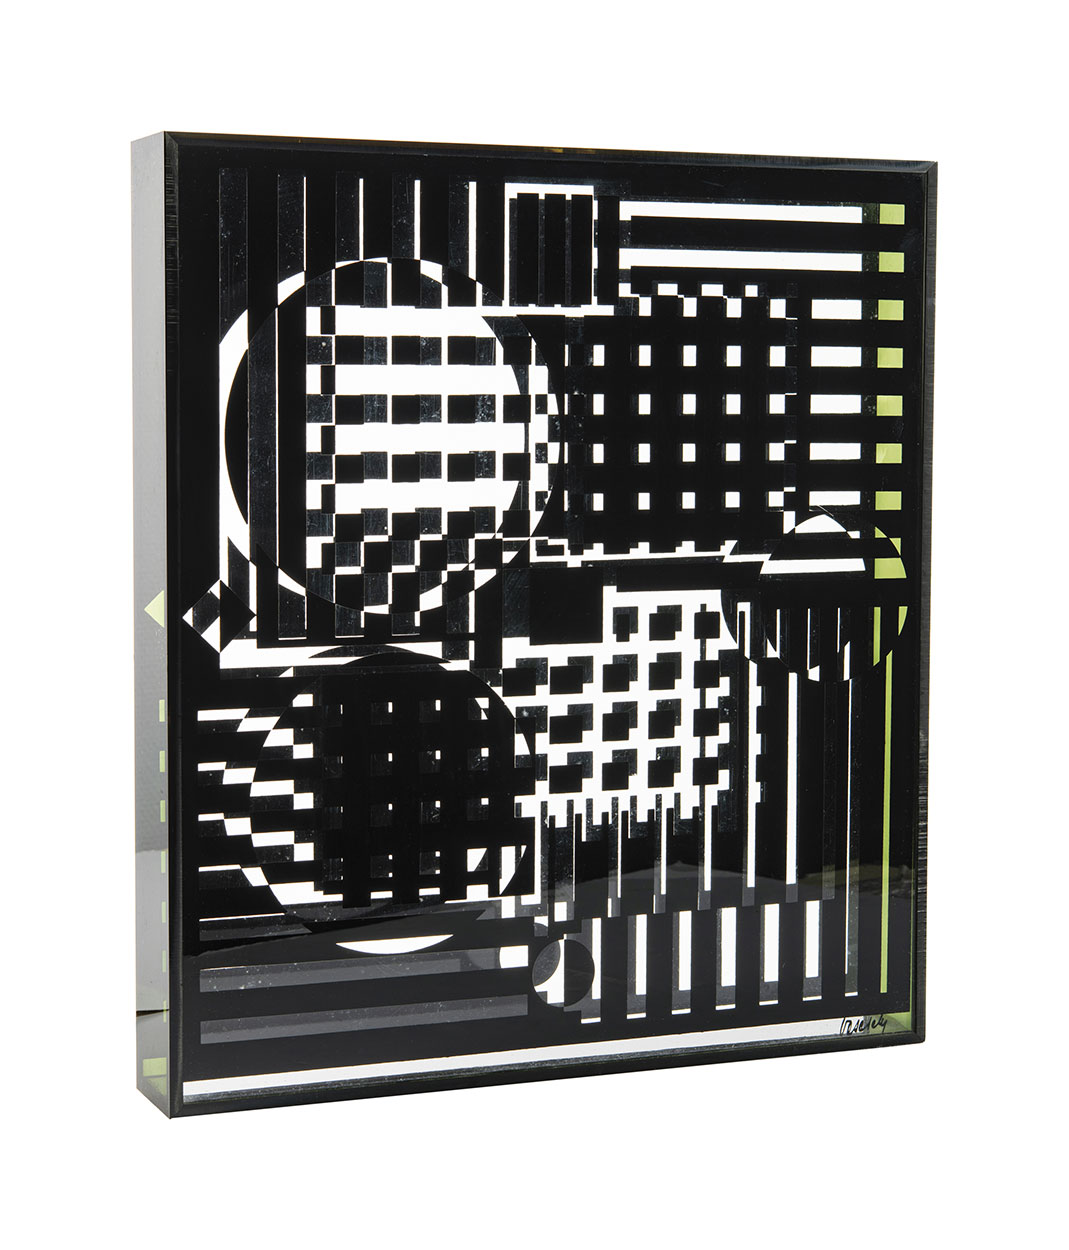 Vasarely Victor (1906-1997) Kinetic object